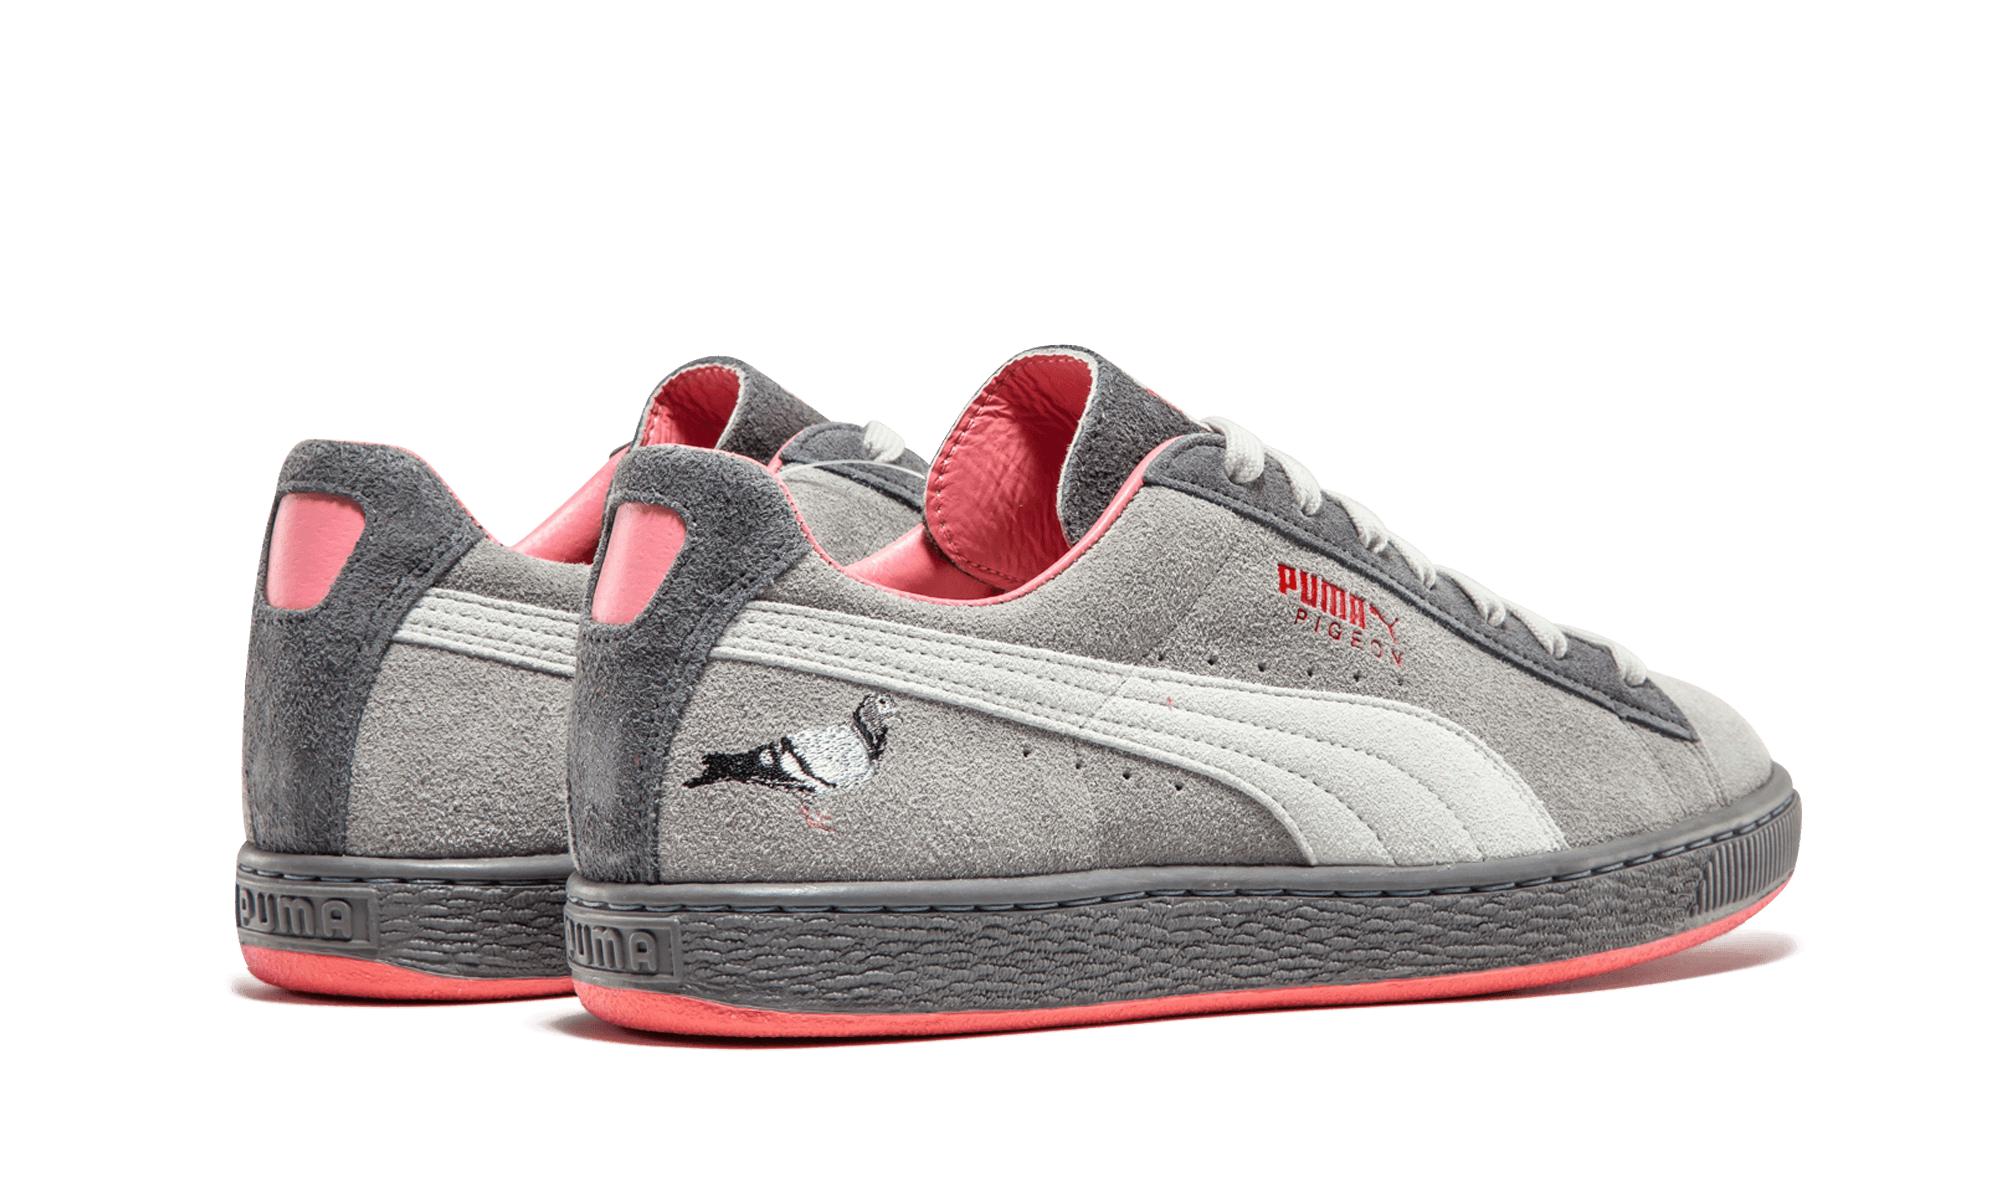 grey and pink puma suedes